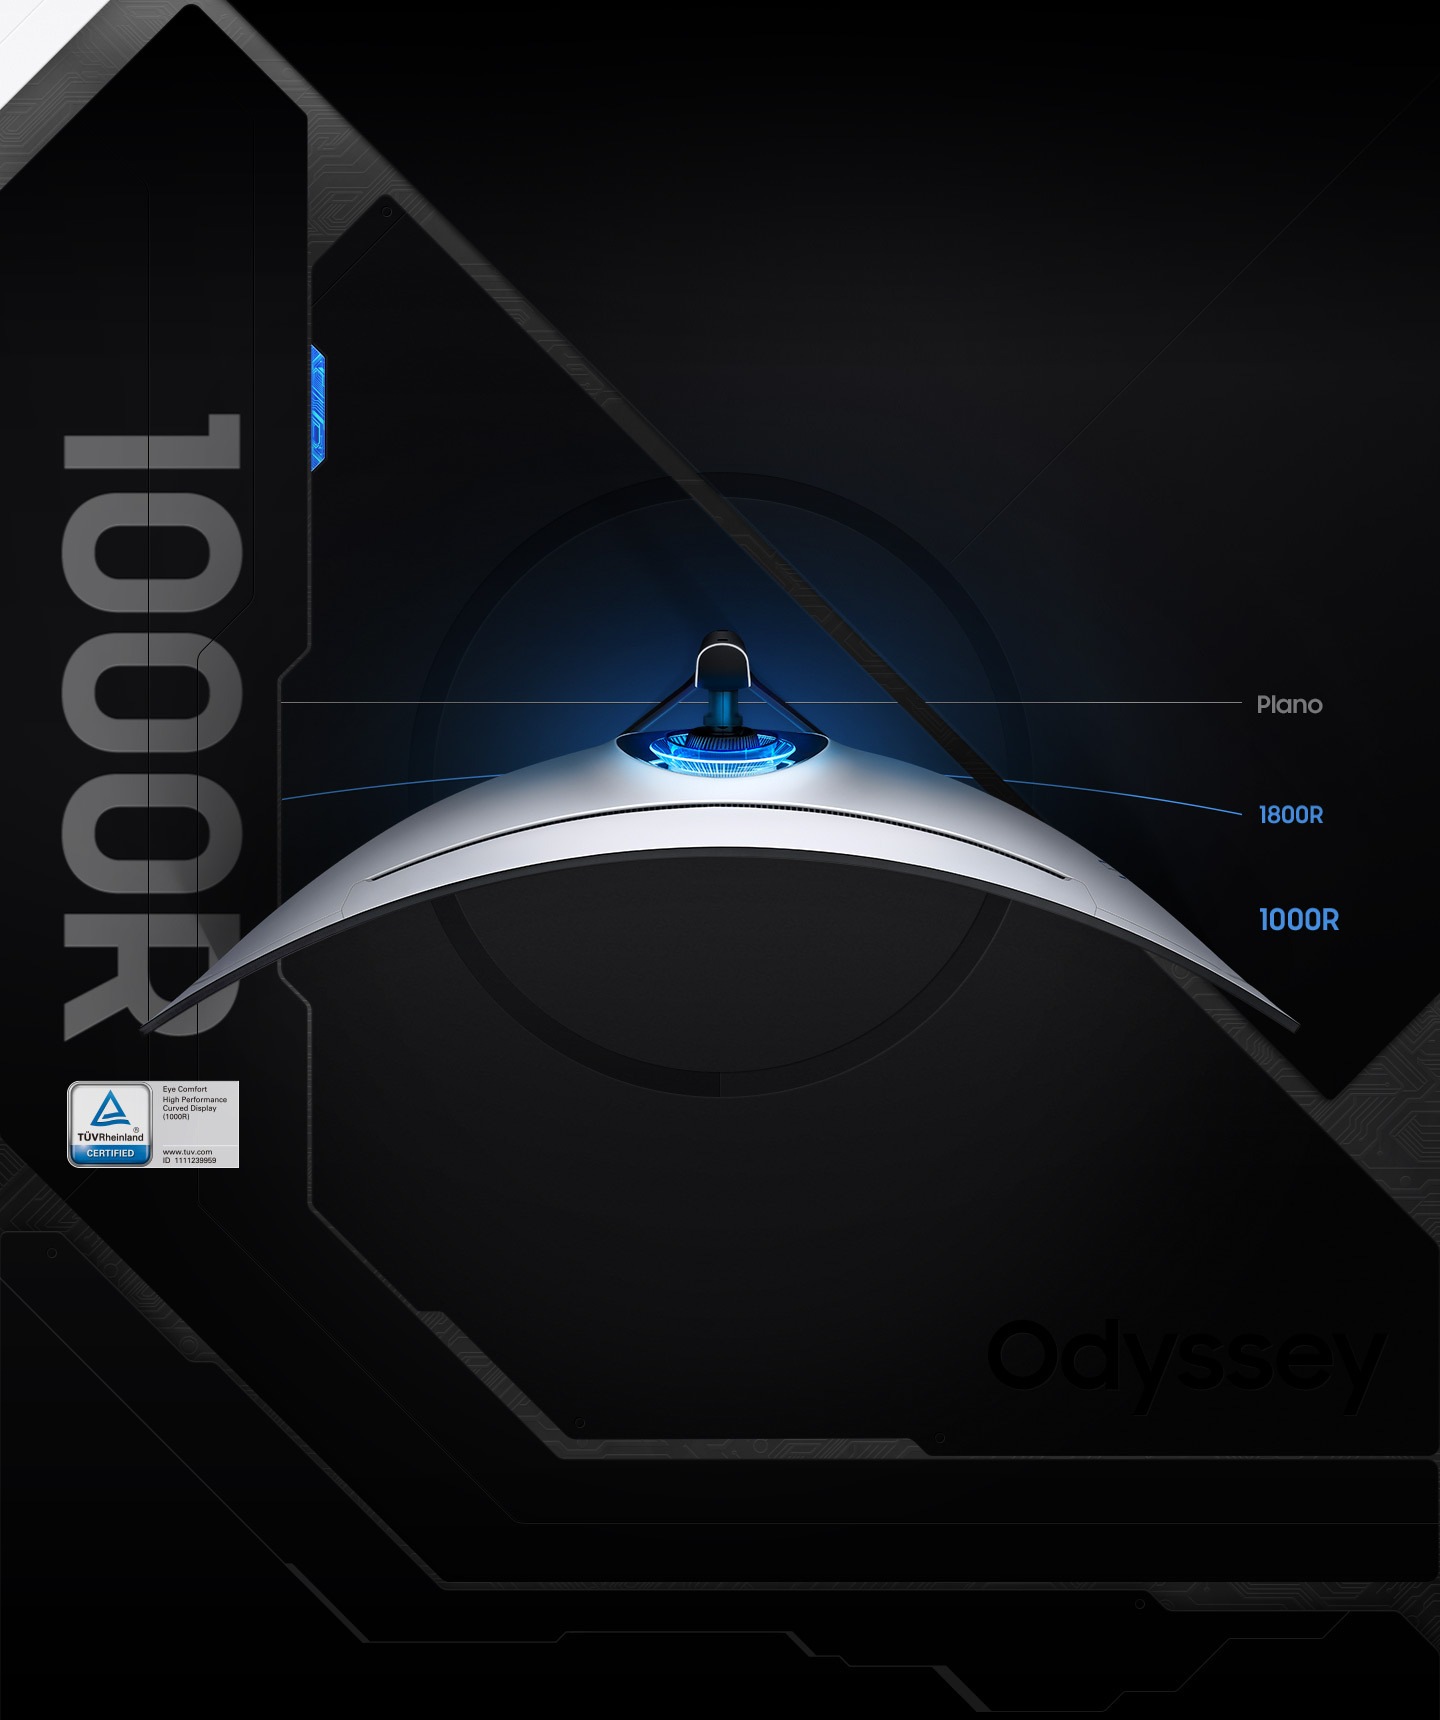 The top of a curved screen monitor is shown with the core lighting on its back lighting up in blue. The logo for TUV is located in the left lower corner. Lines next to the monitor also represent curvatures of flat and 1800R monitors for comparison against 1000R.